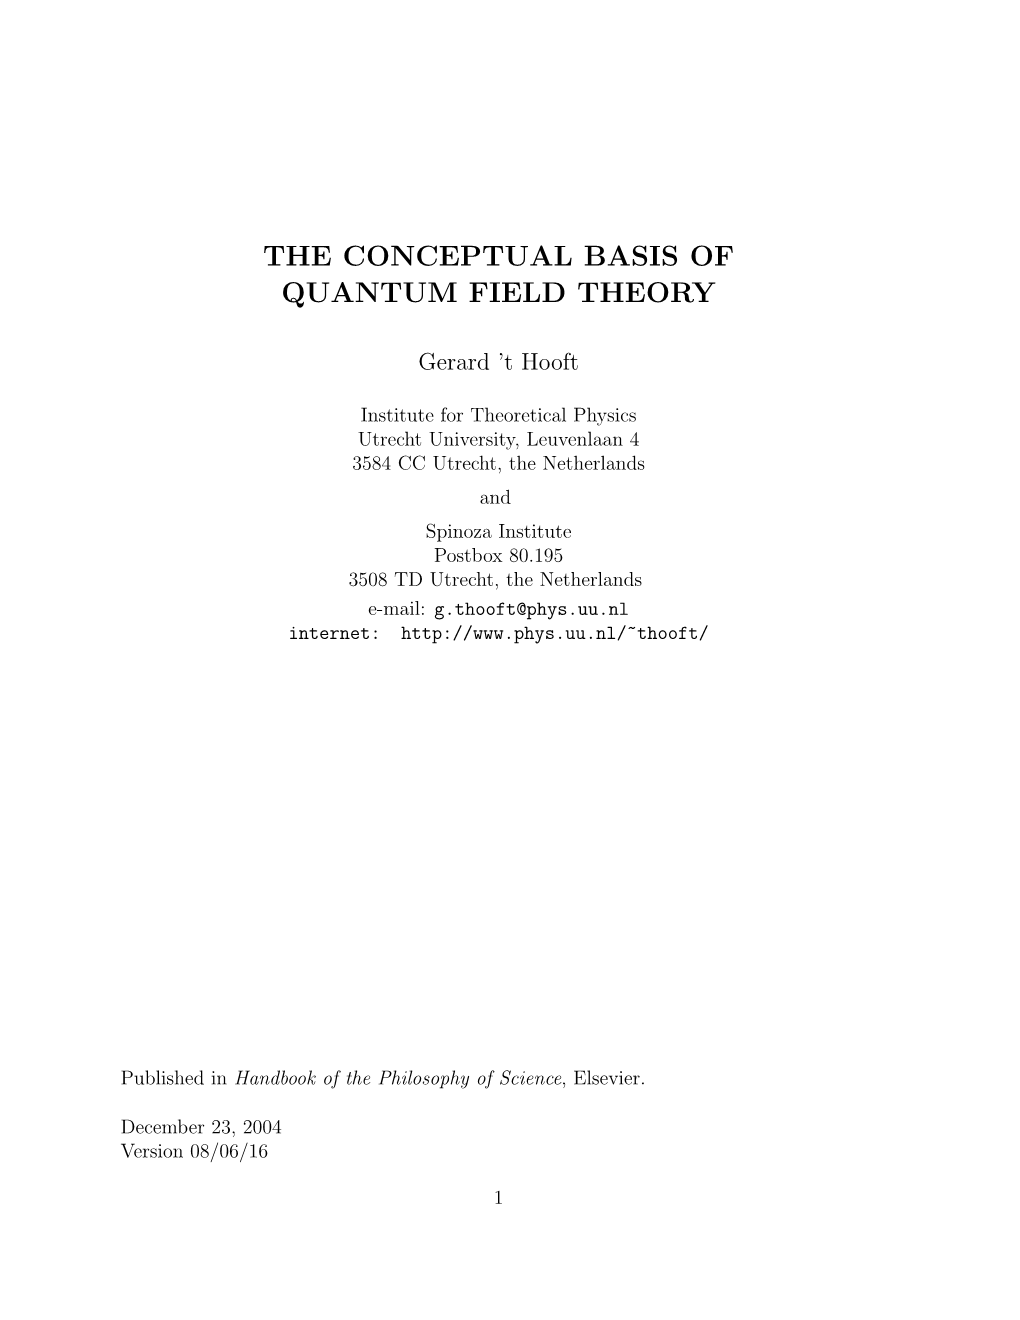 The Conceptual Basis of Quantum Field Theory